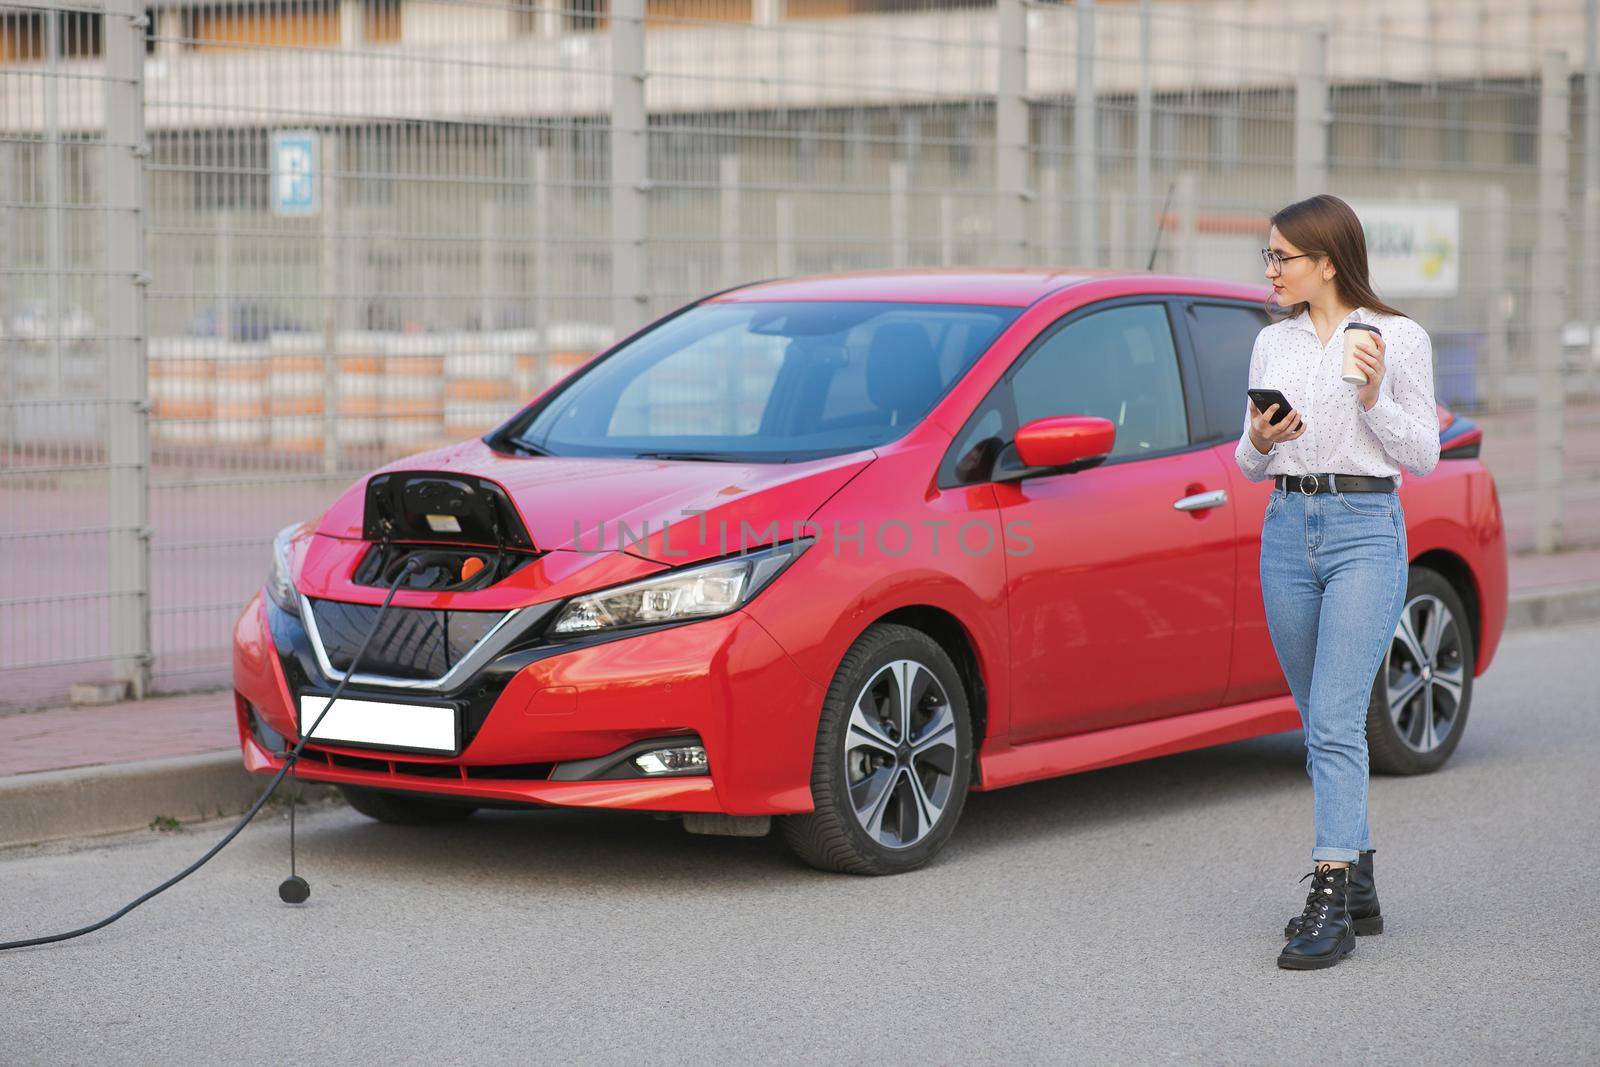 Girl Use Coffee Drink While Using Smart Phone and Waiting Power Supply Connect to Electric Vehicles for Charging the Battery in Car